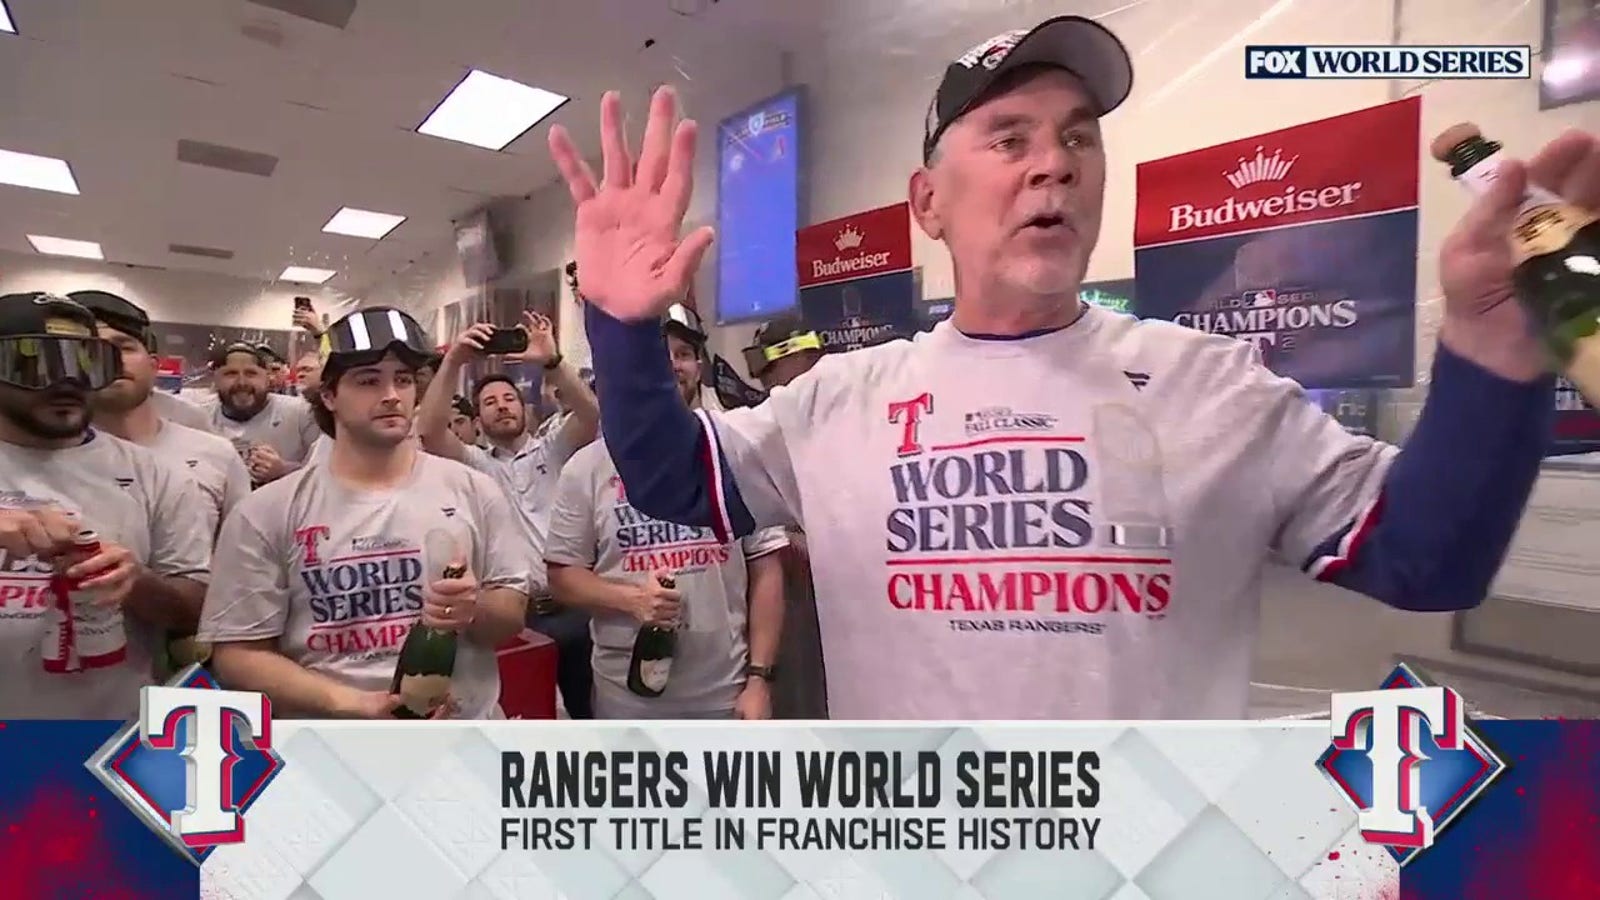 "You guys just wrote history" — Bruce Bochy to the Rangers